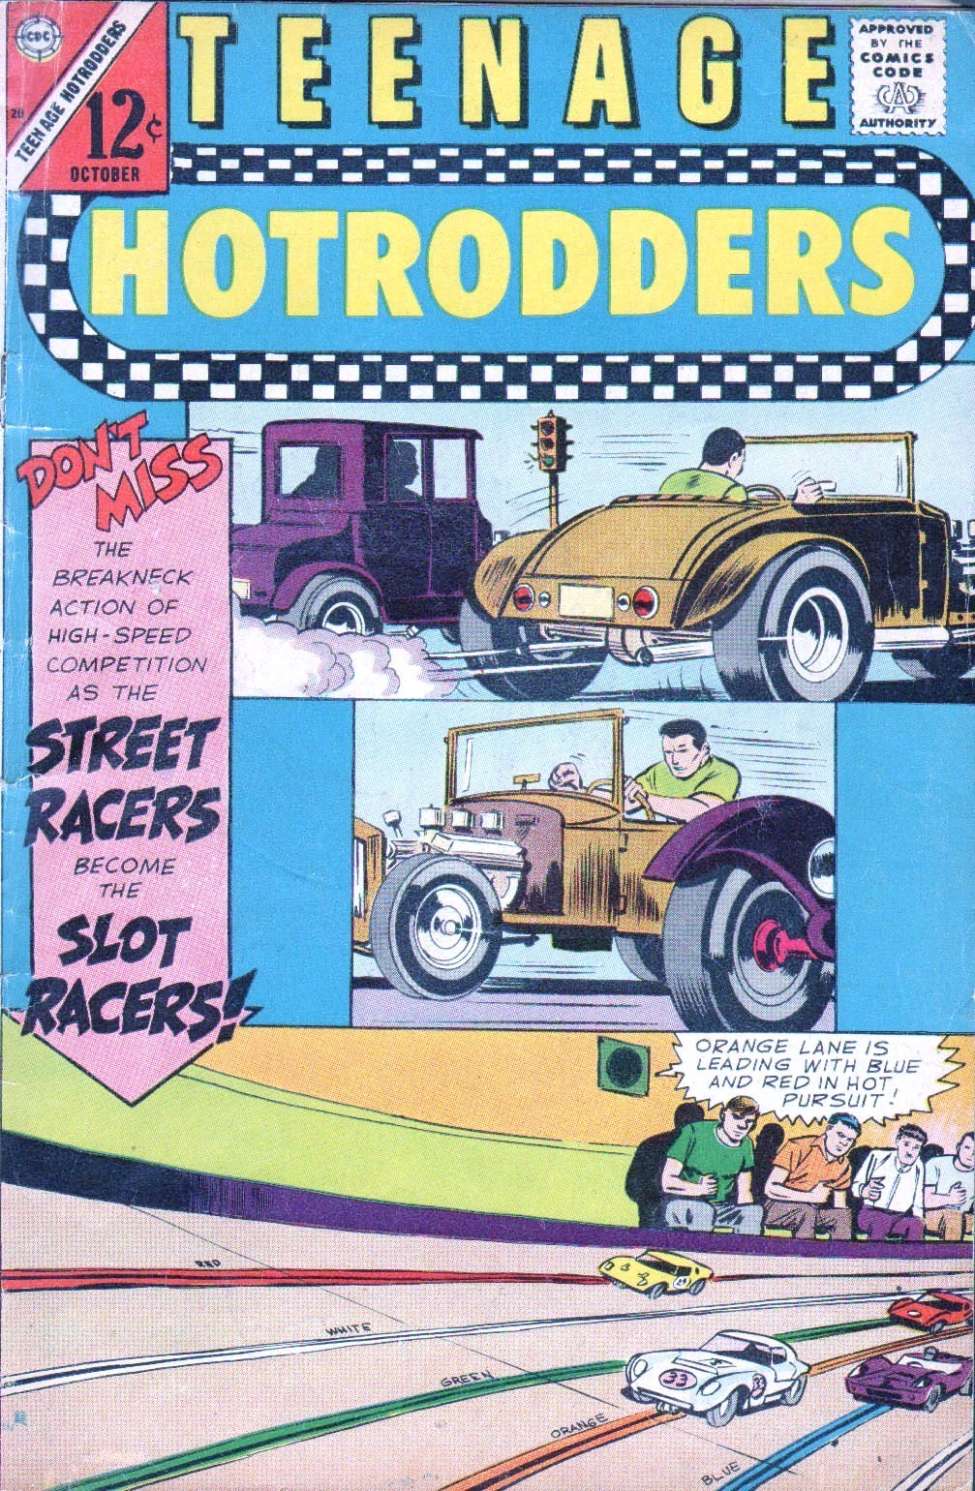 Book Cover For Teenage Hotrodders 20